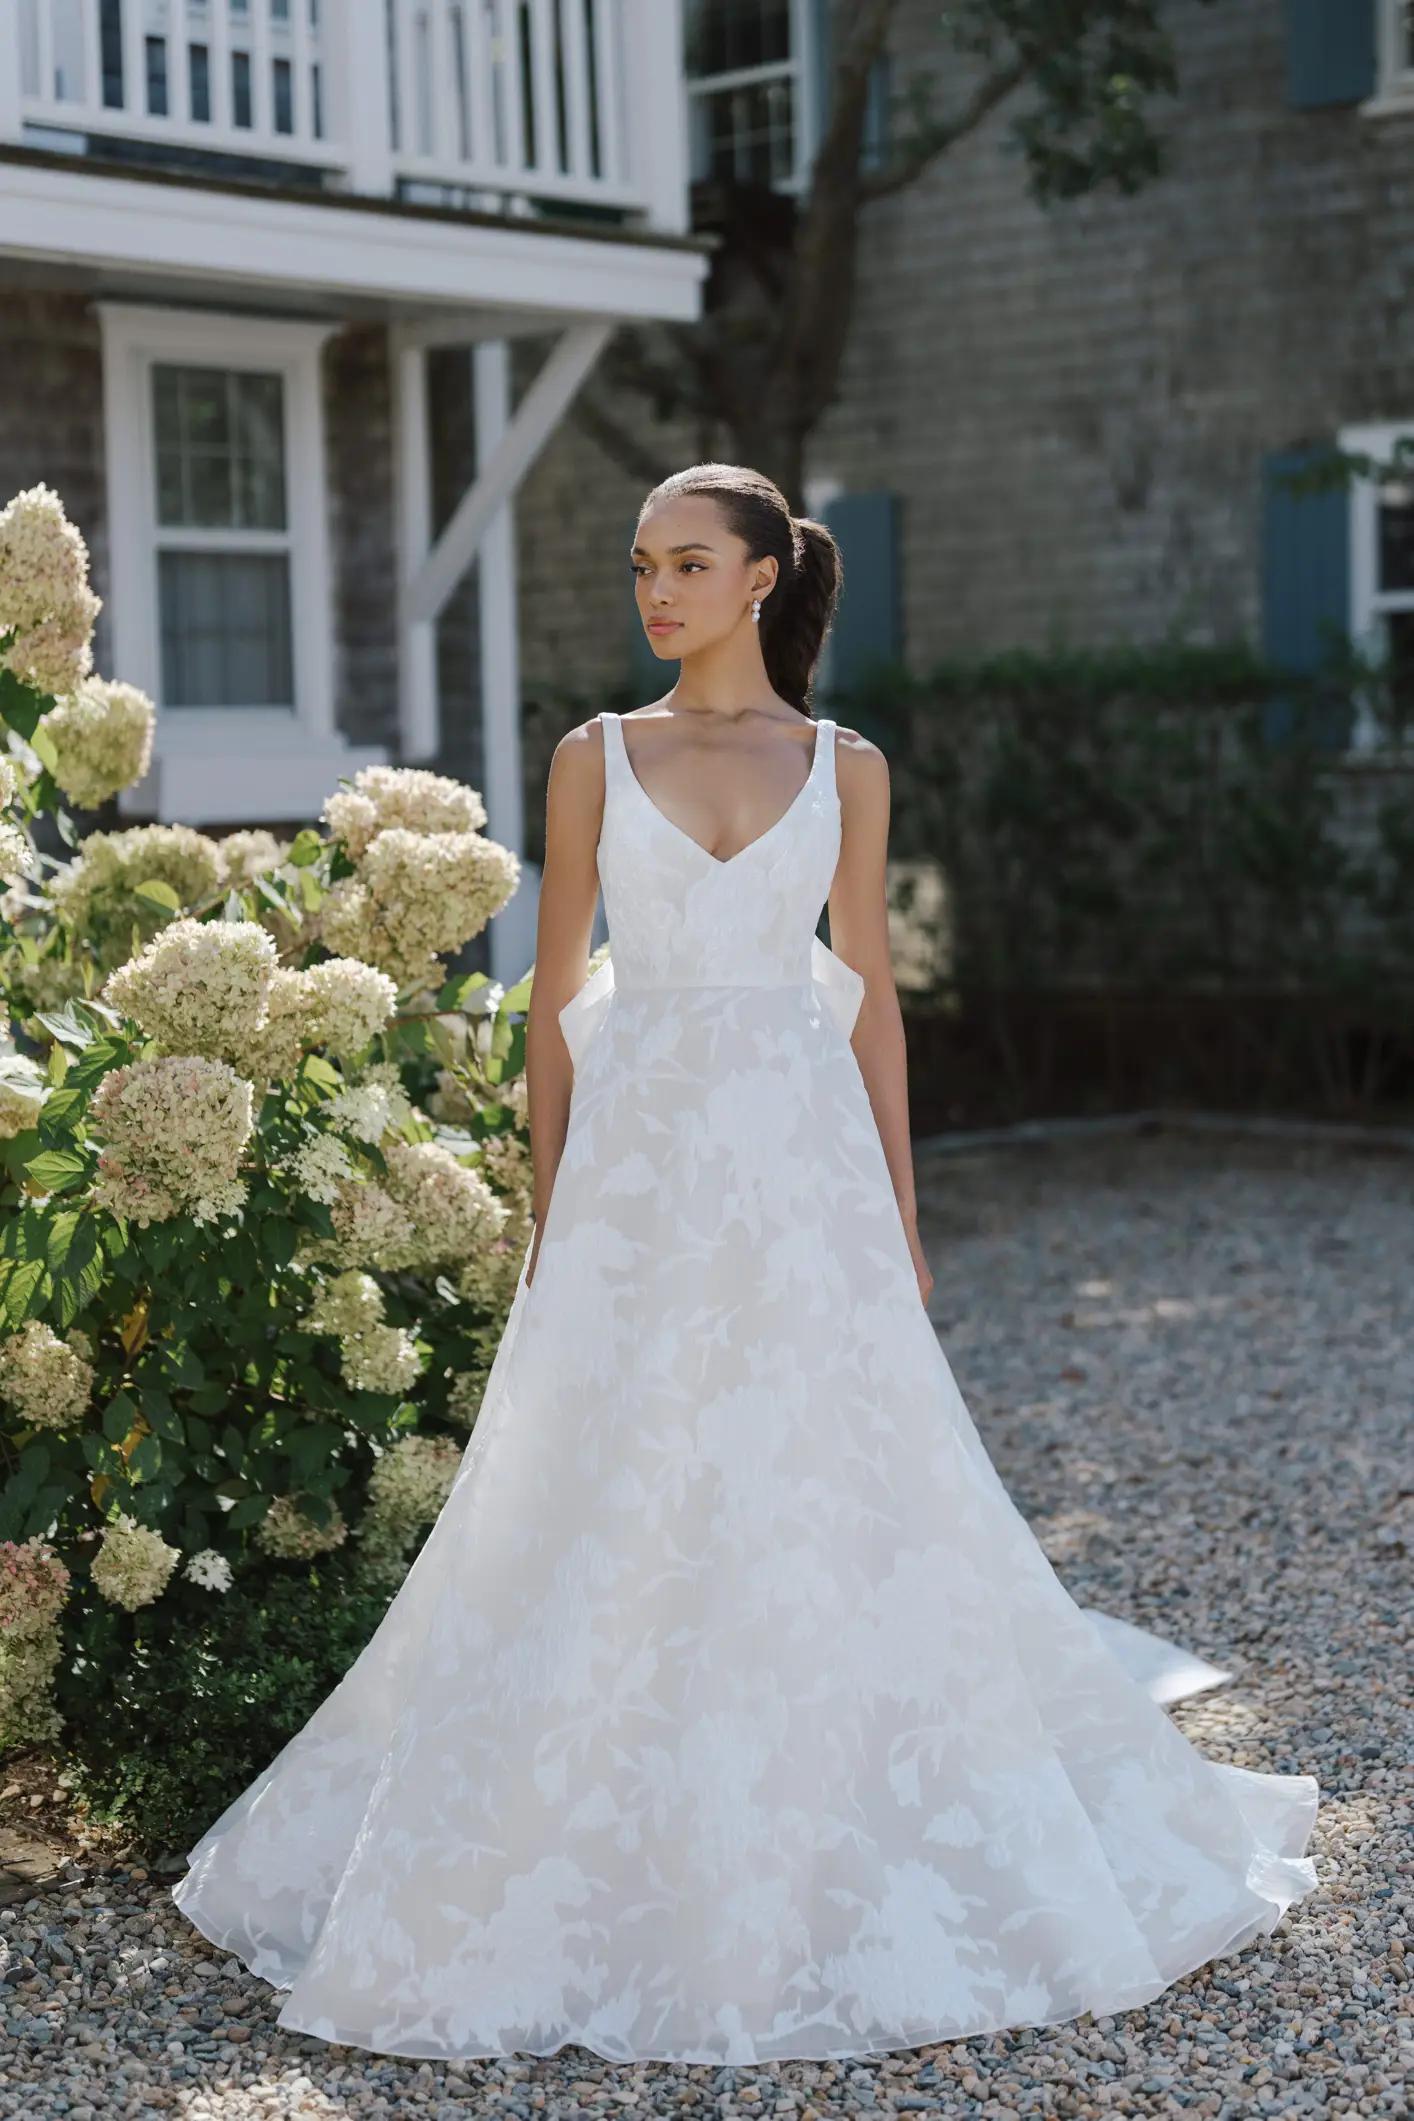 Liberty wedding dress by Anne Barge with v neckline floral detail ballgown skirt and bow on the back